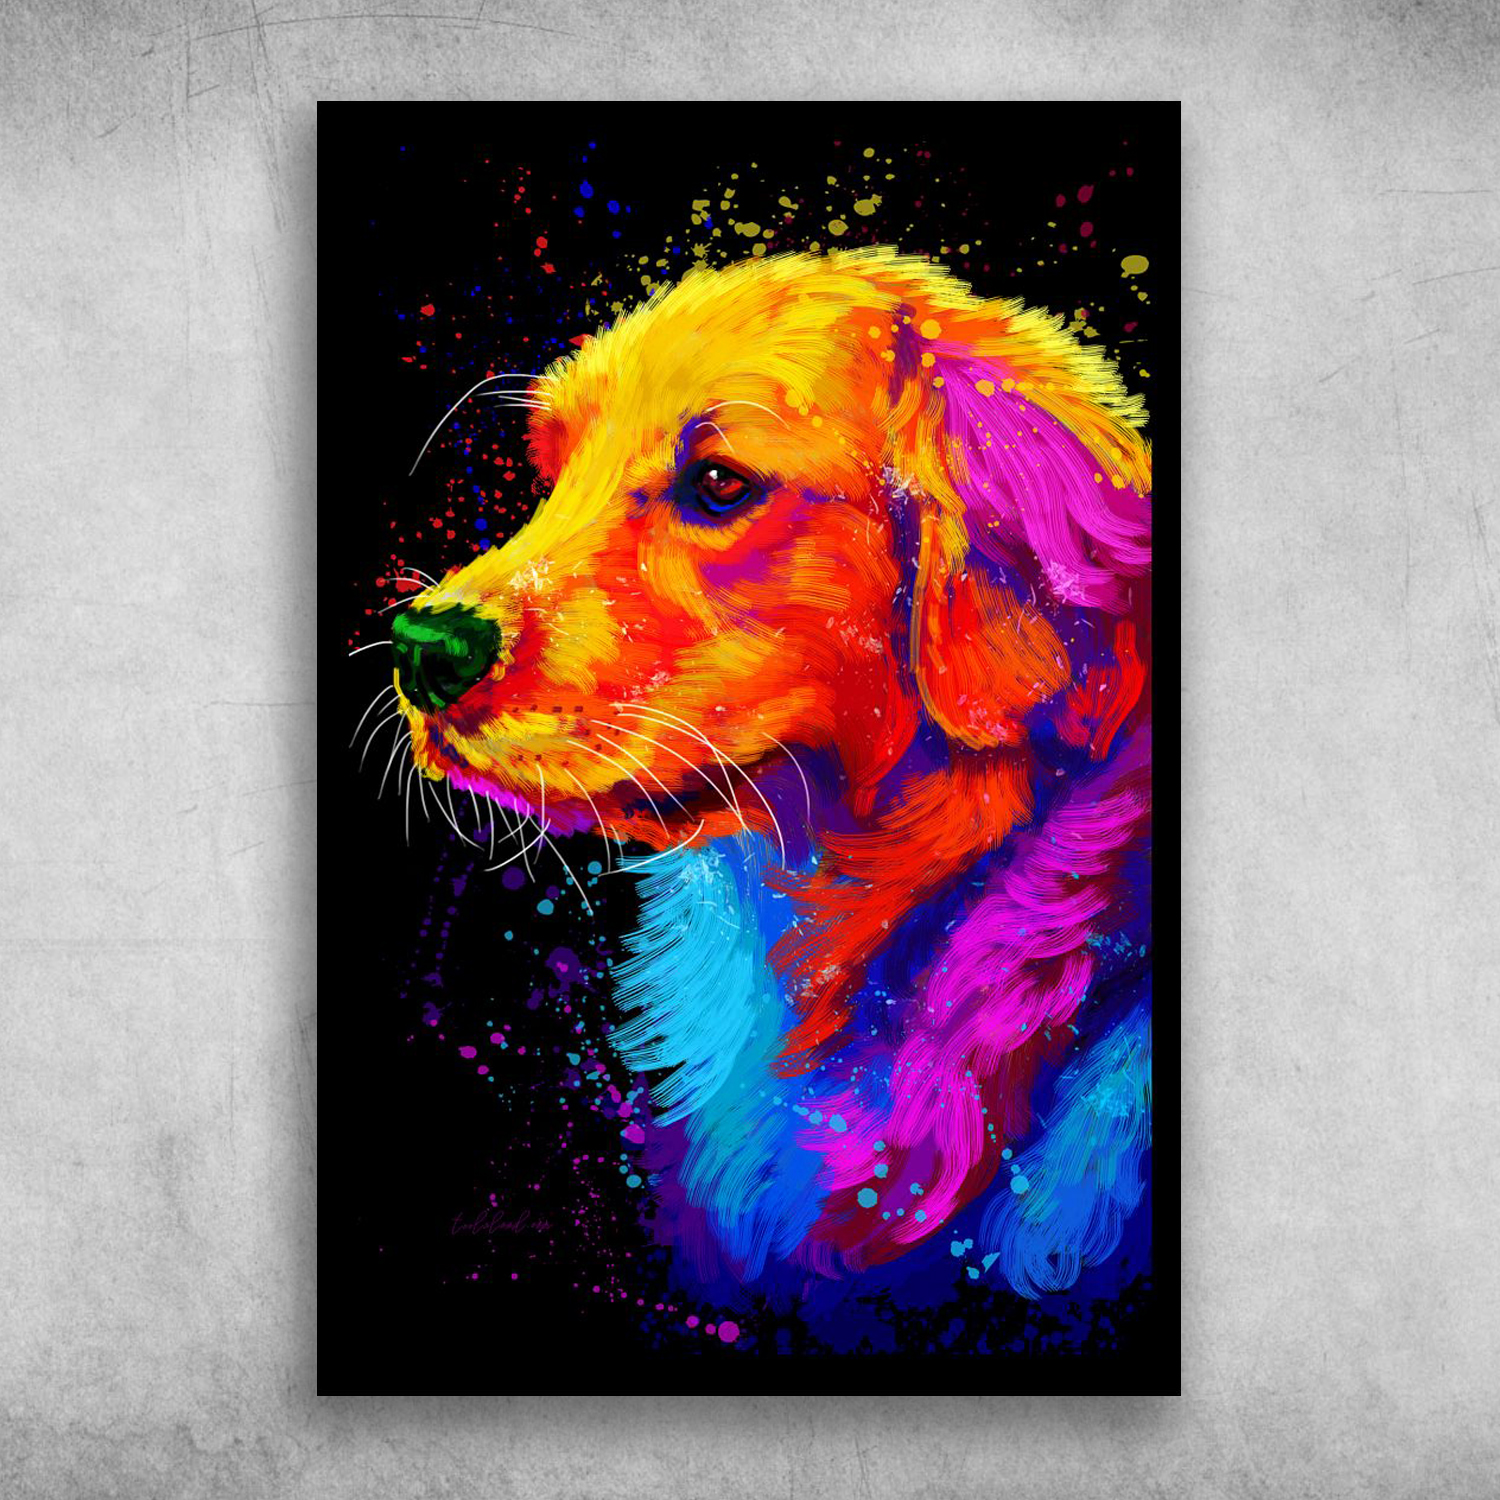 Beautiful Watercolor Painting Of Golden Retriever Dog